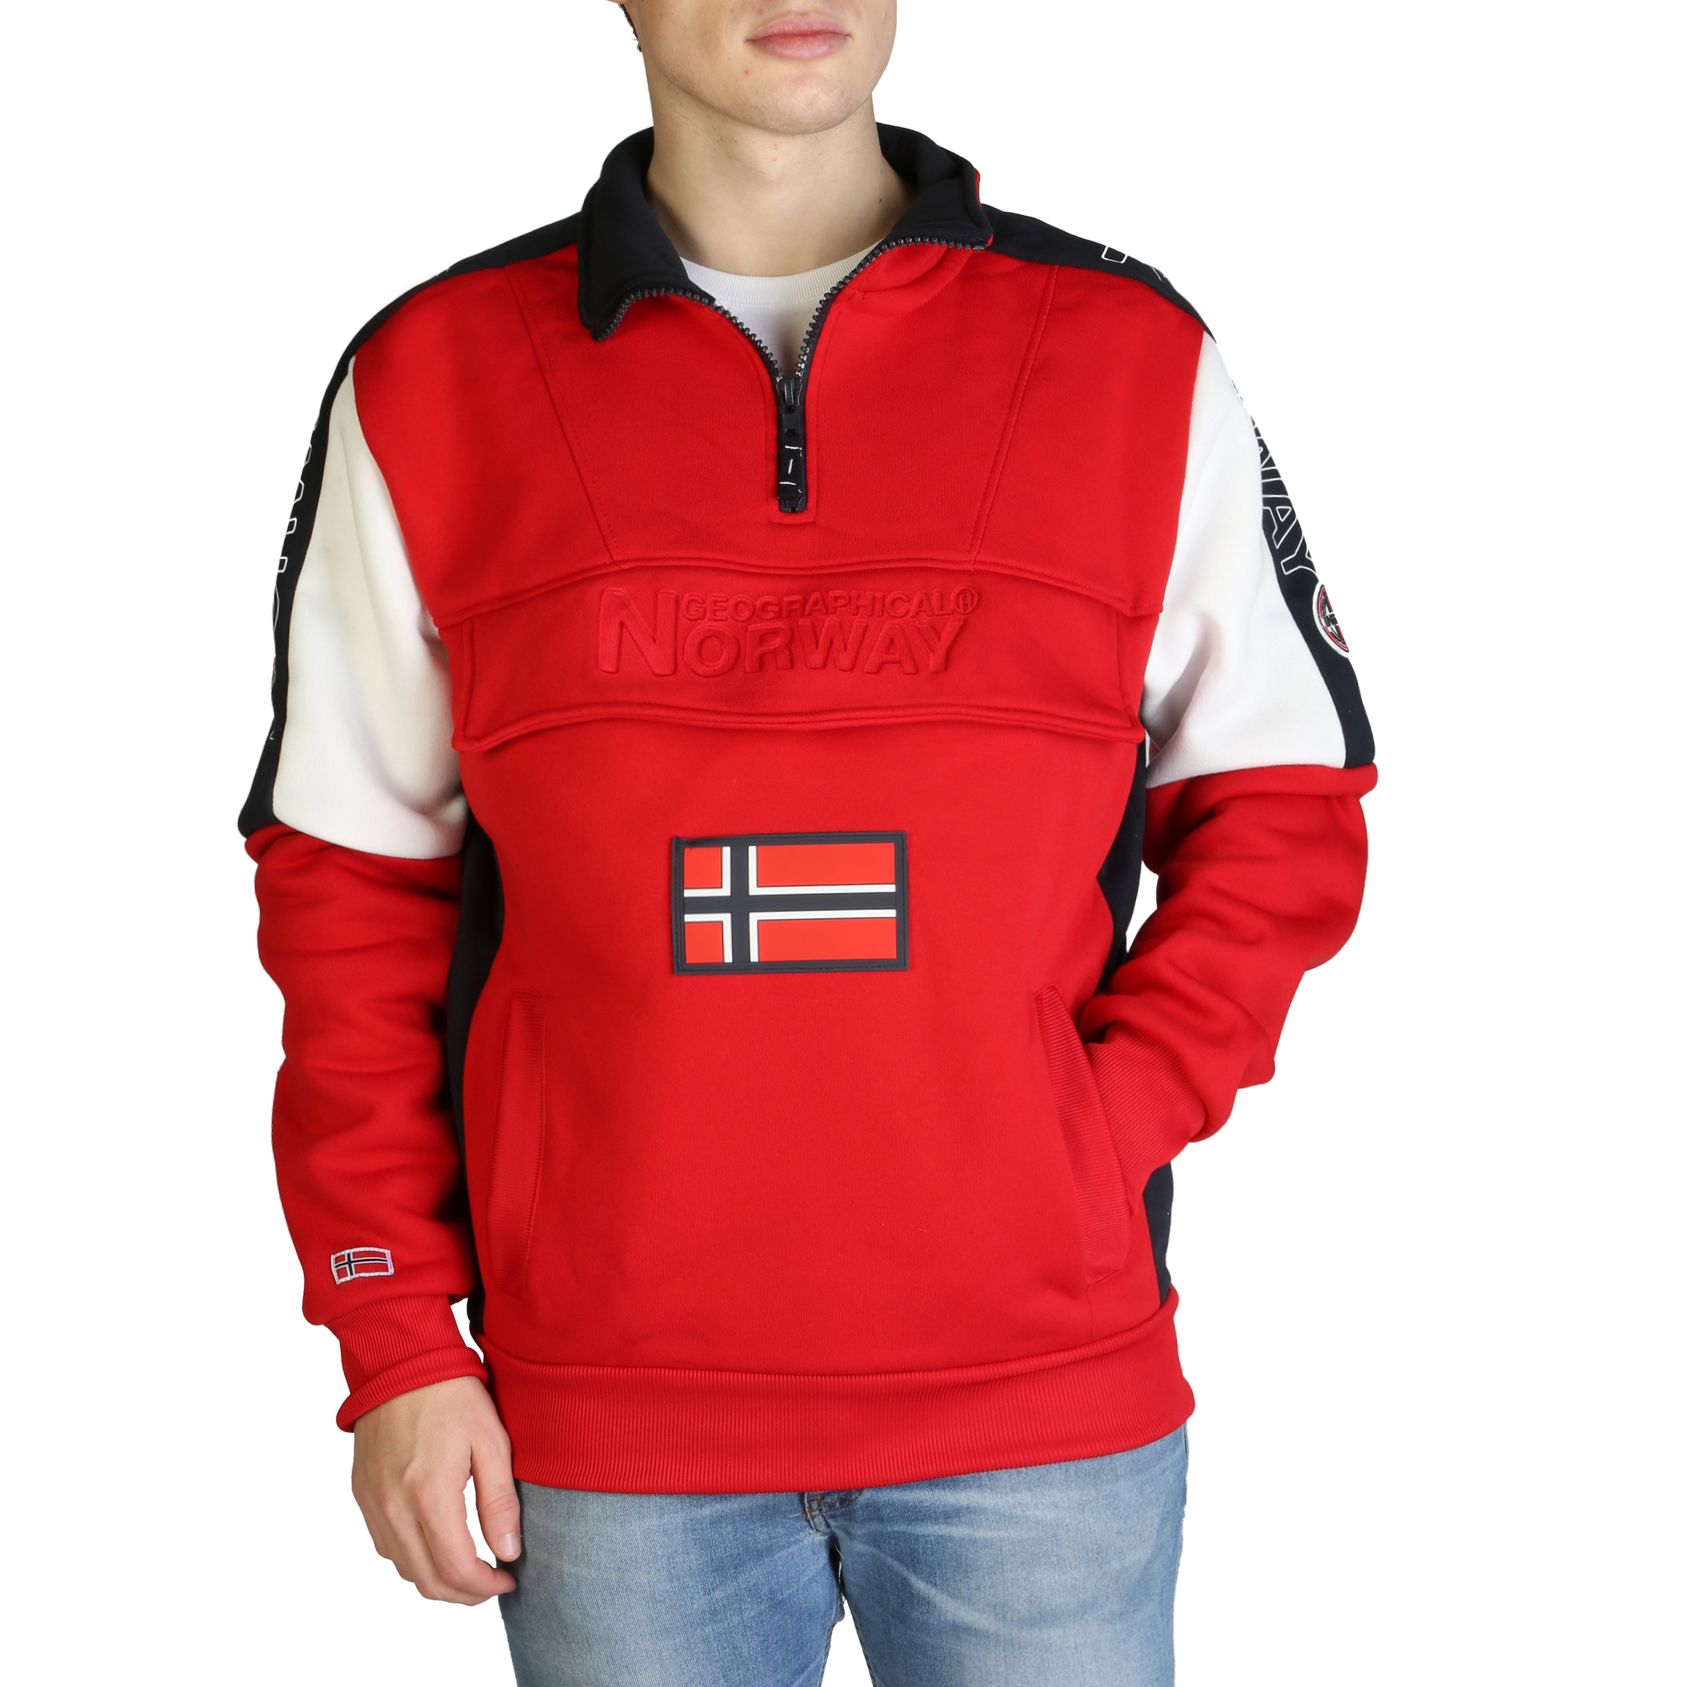 Vêtements sweat-shirts geographical norway homme s